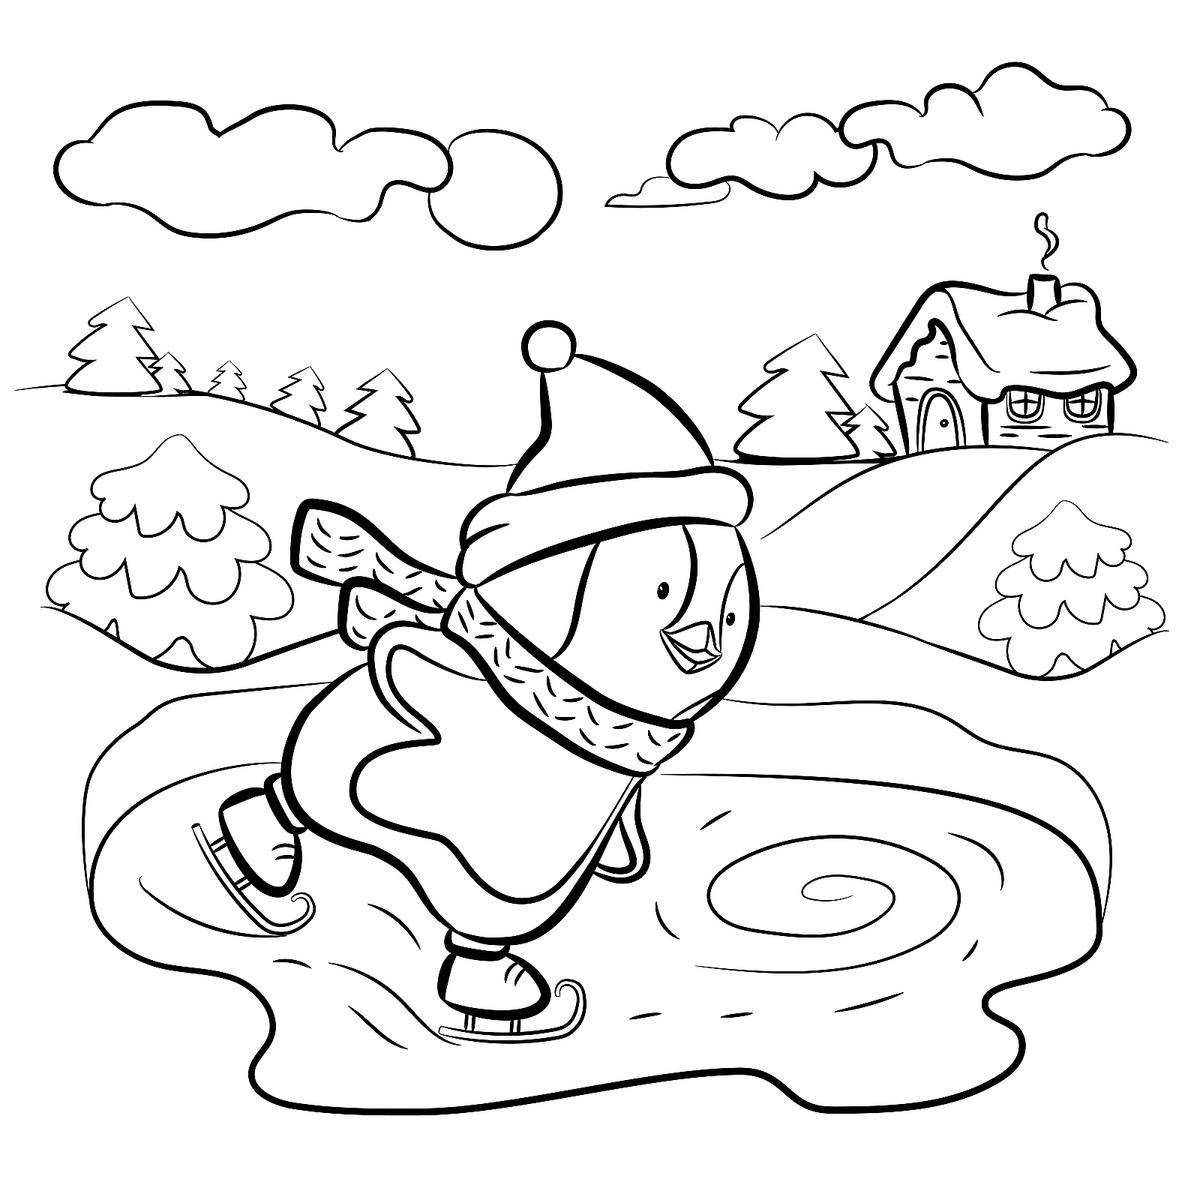 Winter Coloring Pages Printable Collection Winter Coloring Pages Printable Pictures Sabadaphnecottage